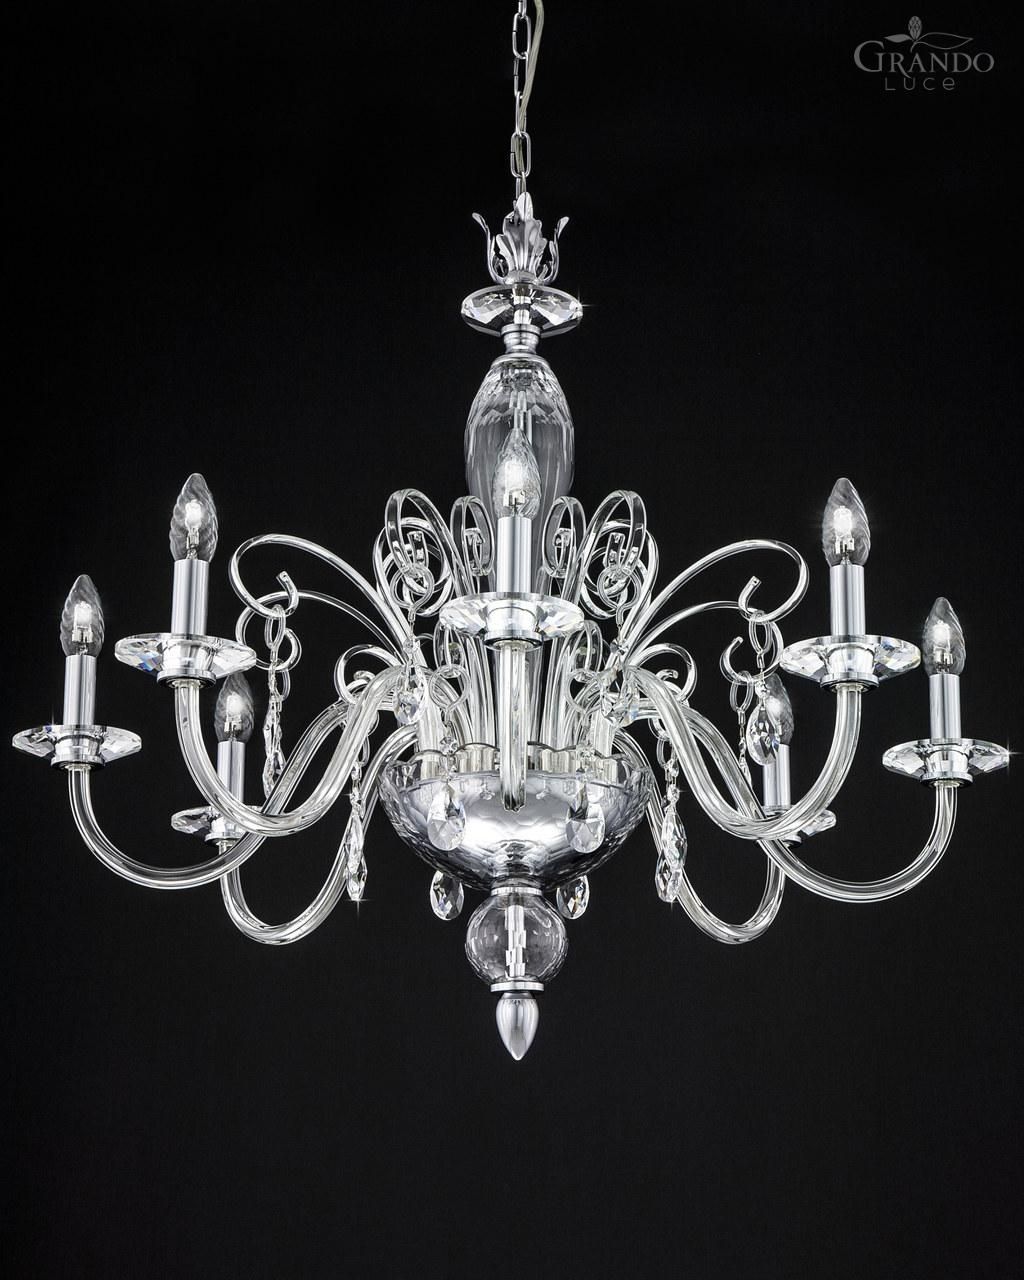 1208 Ch Chrome Crystal Chandelier With Swarovski Elements With Regard To Crystal And Chrome Chandeliers (View 7 of 12)